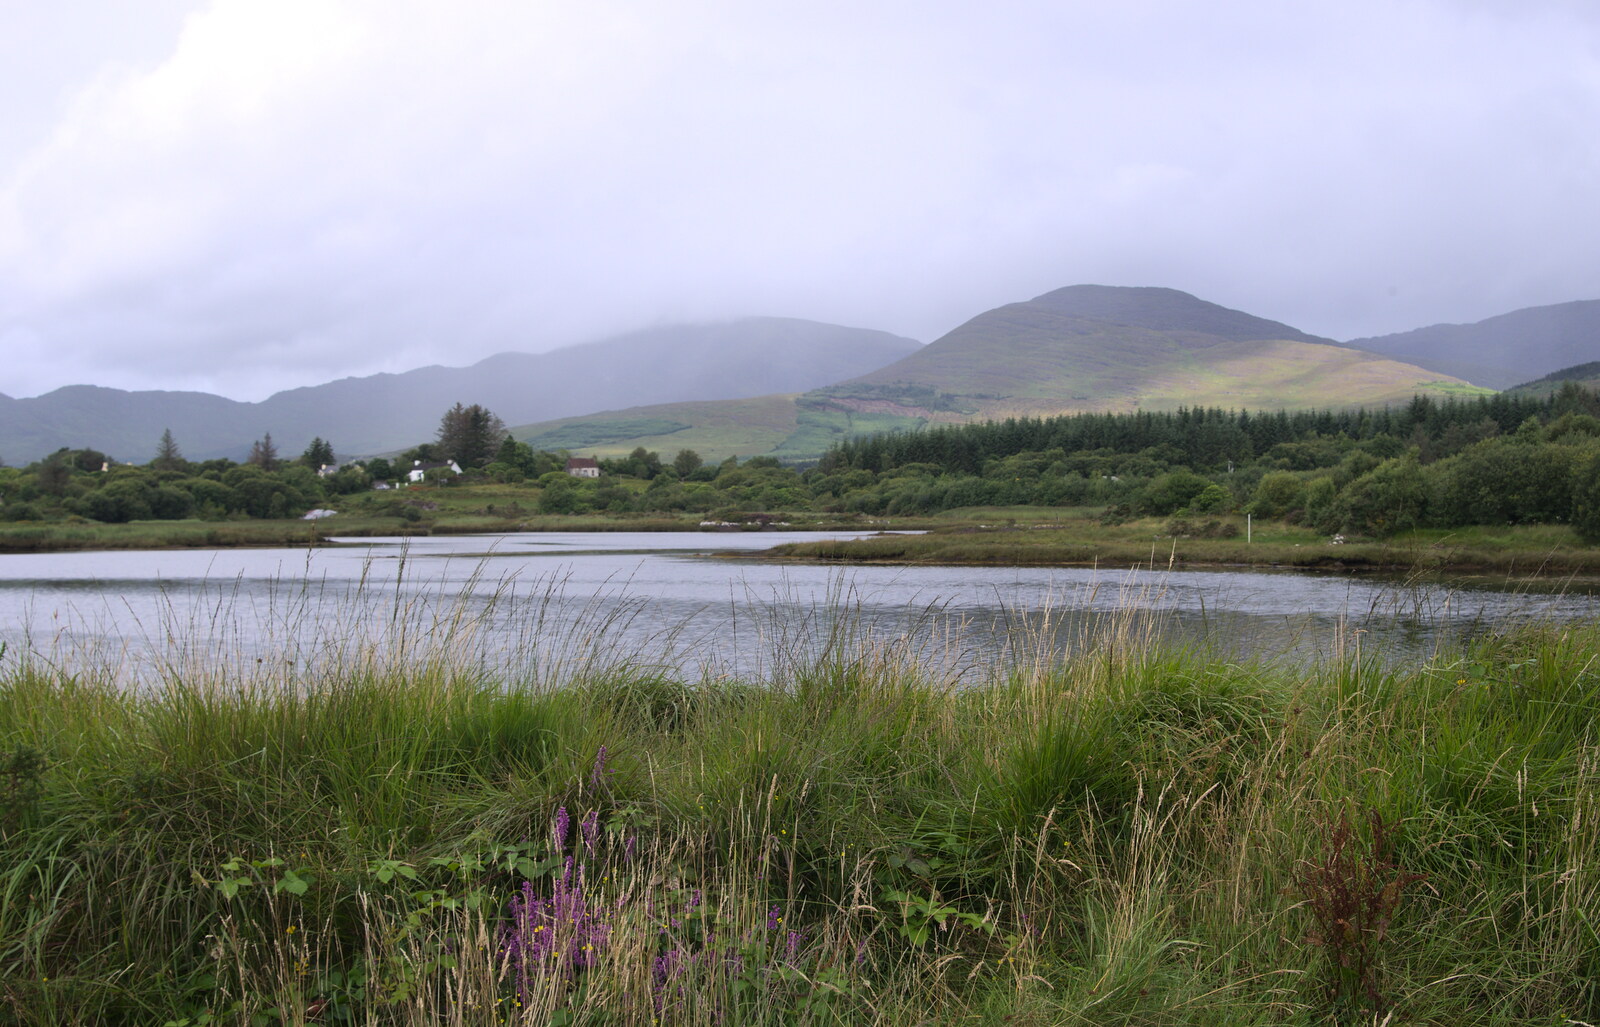 Down by the lake from In The Sneem, An tSnaidhm, Kerry, Ireland - 1st August 2017